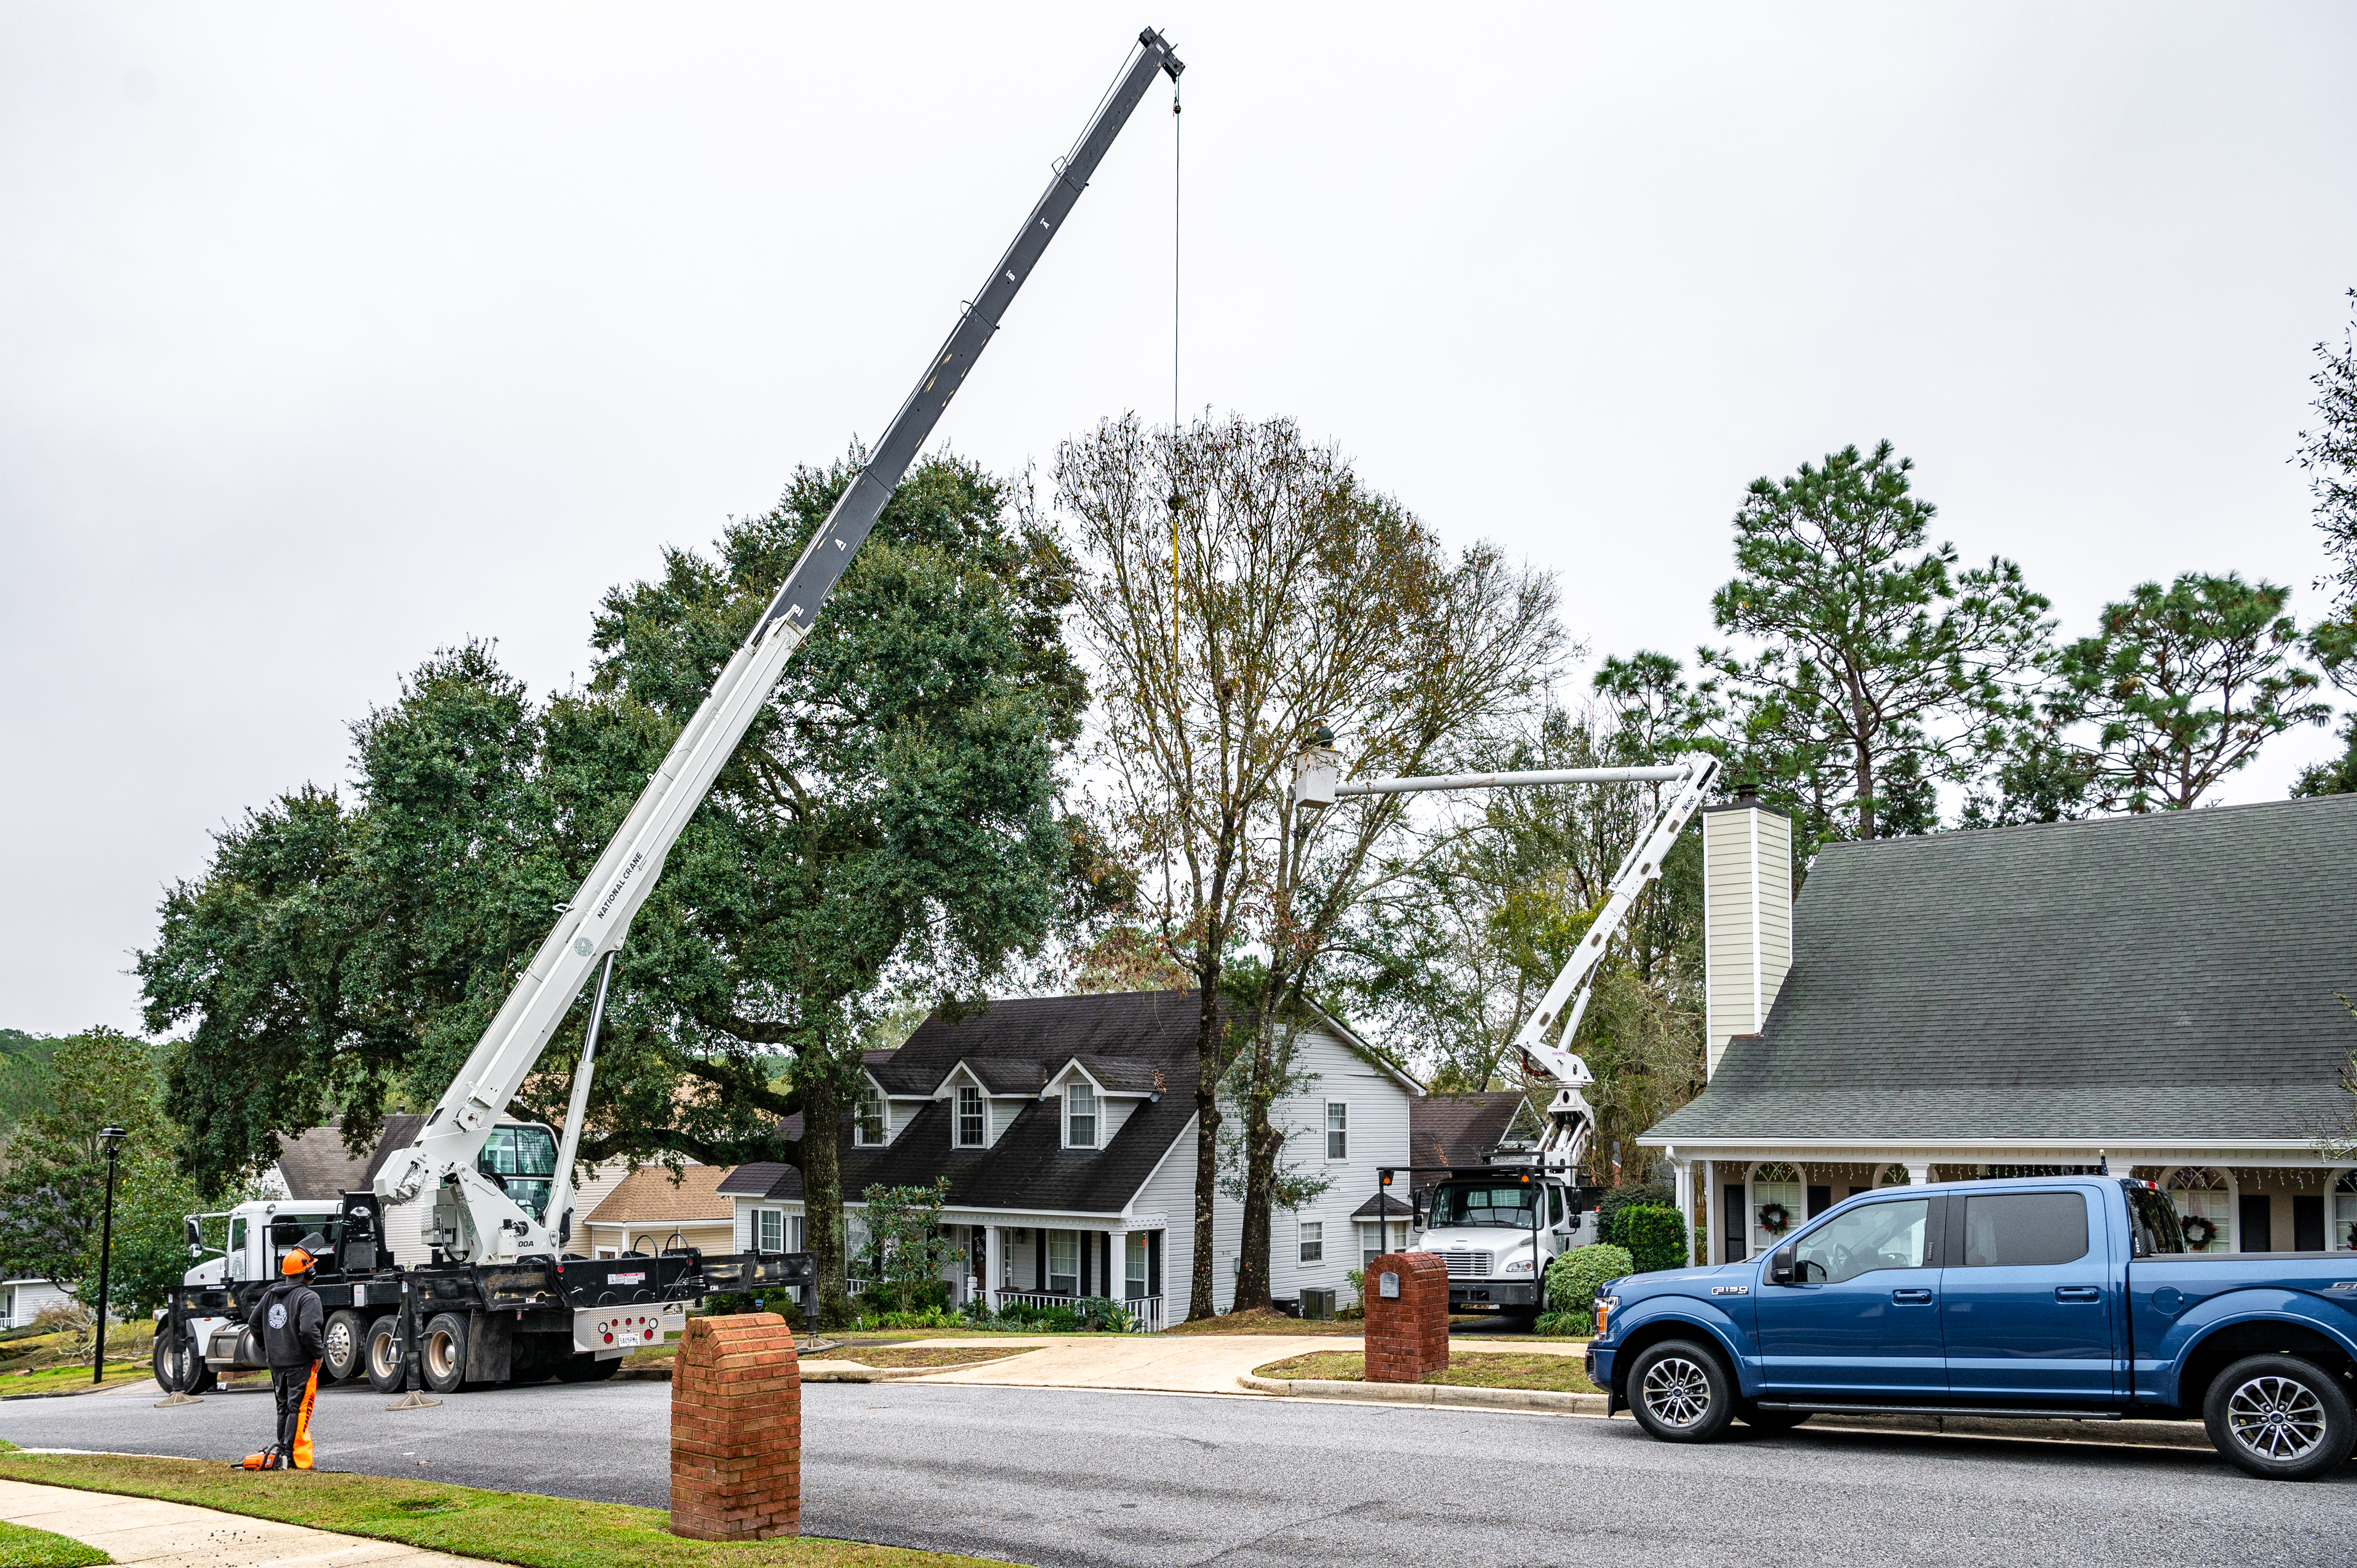 Crane and Bucket truck remove tree hanging over house.